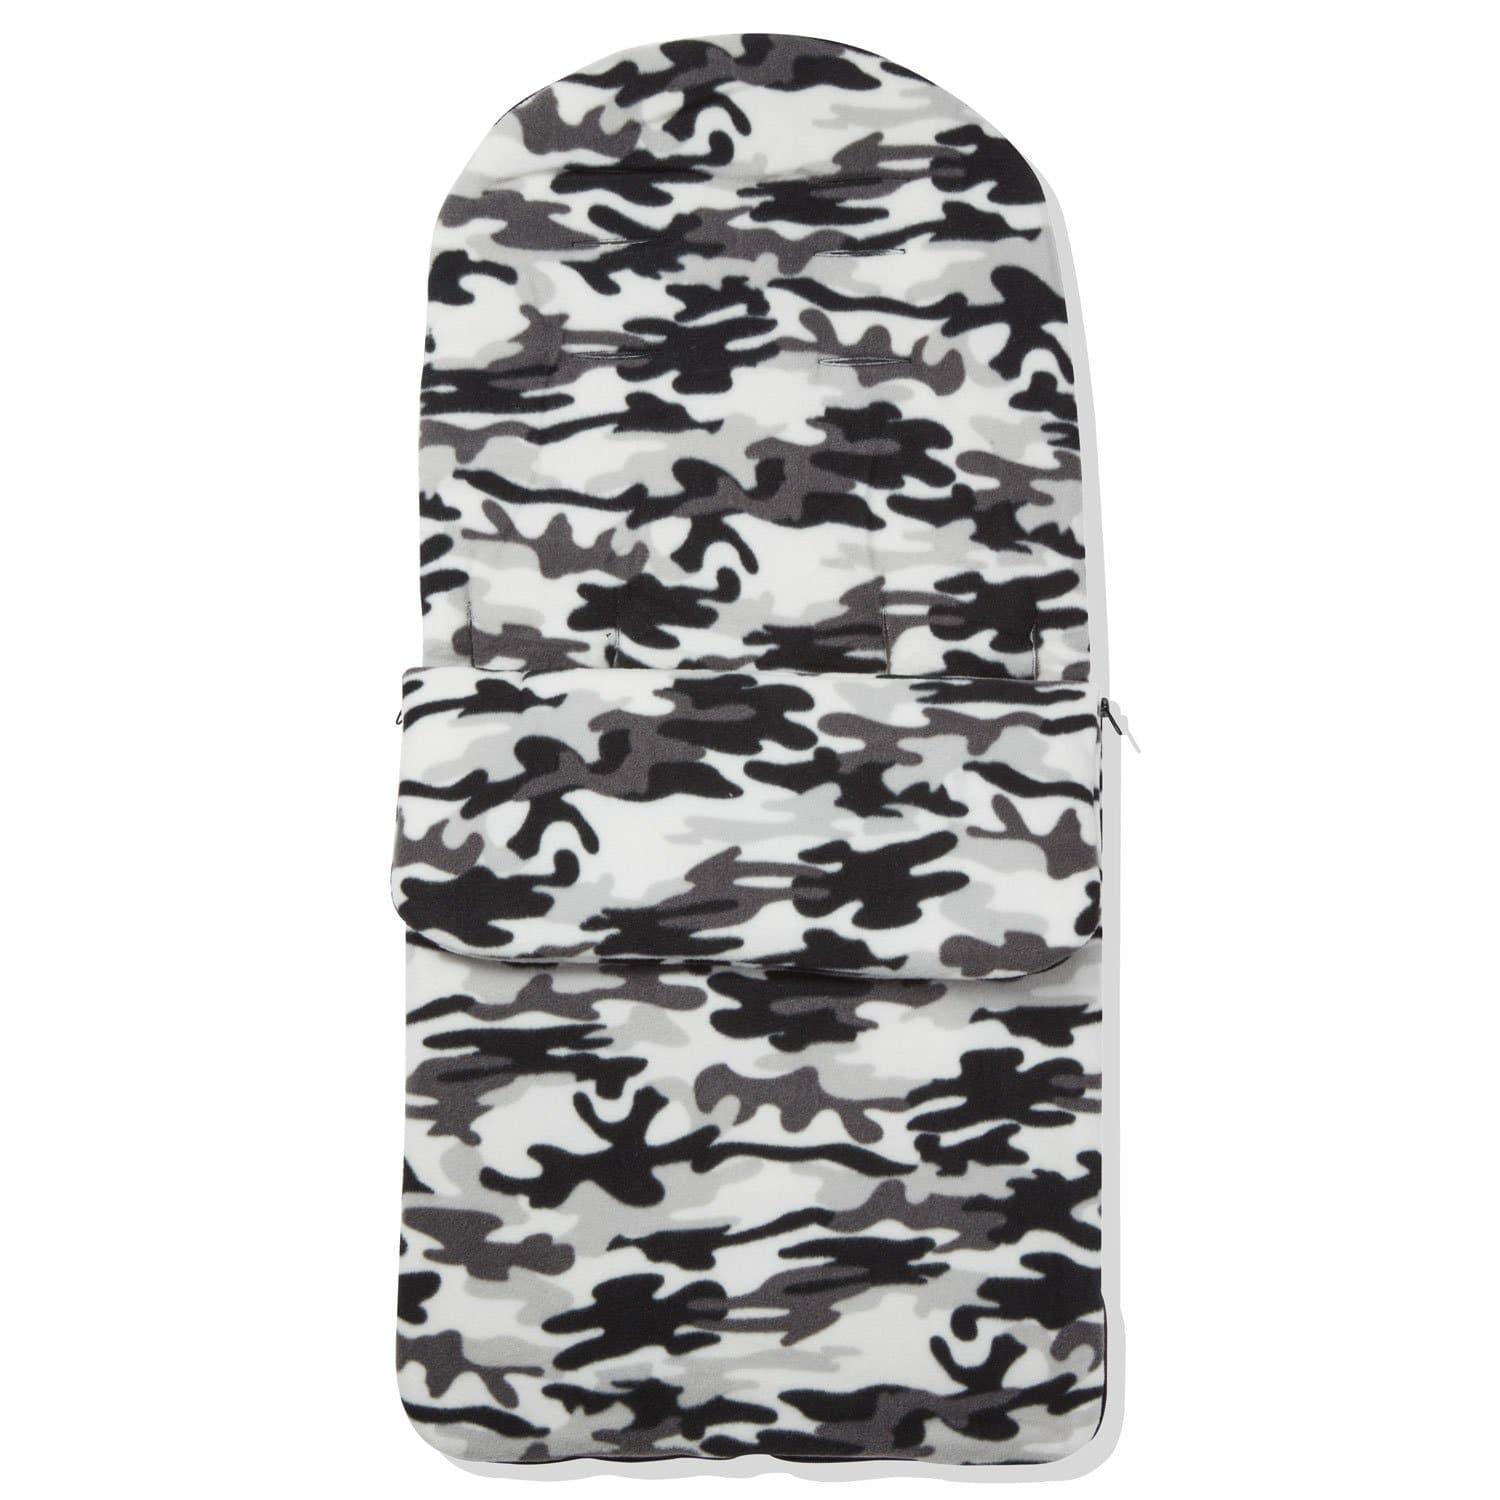 Fleece Footmuff / Cosy Toes Compatible with Little Shield - Grey Camouflage / Fits All Models | For Your Little One